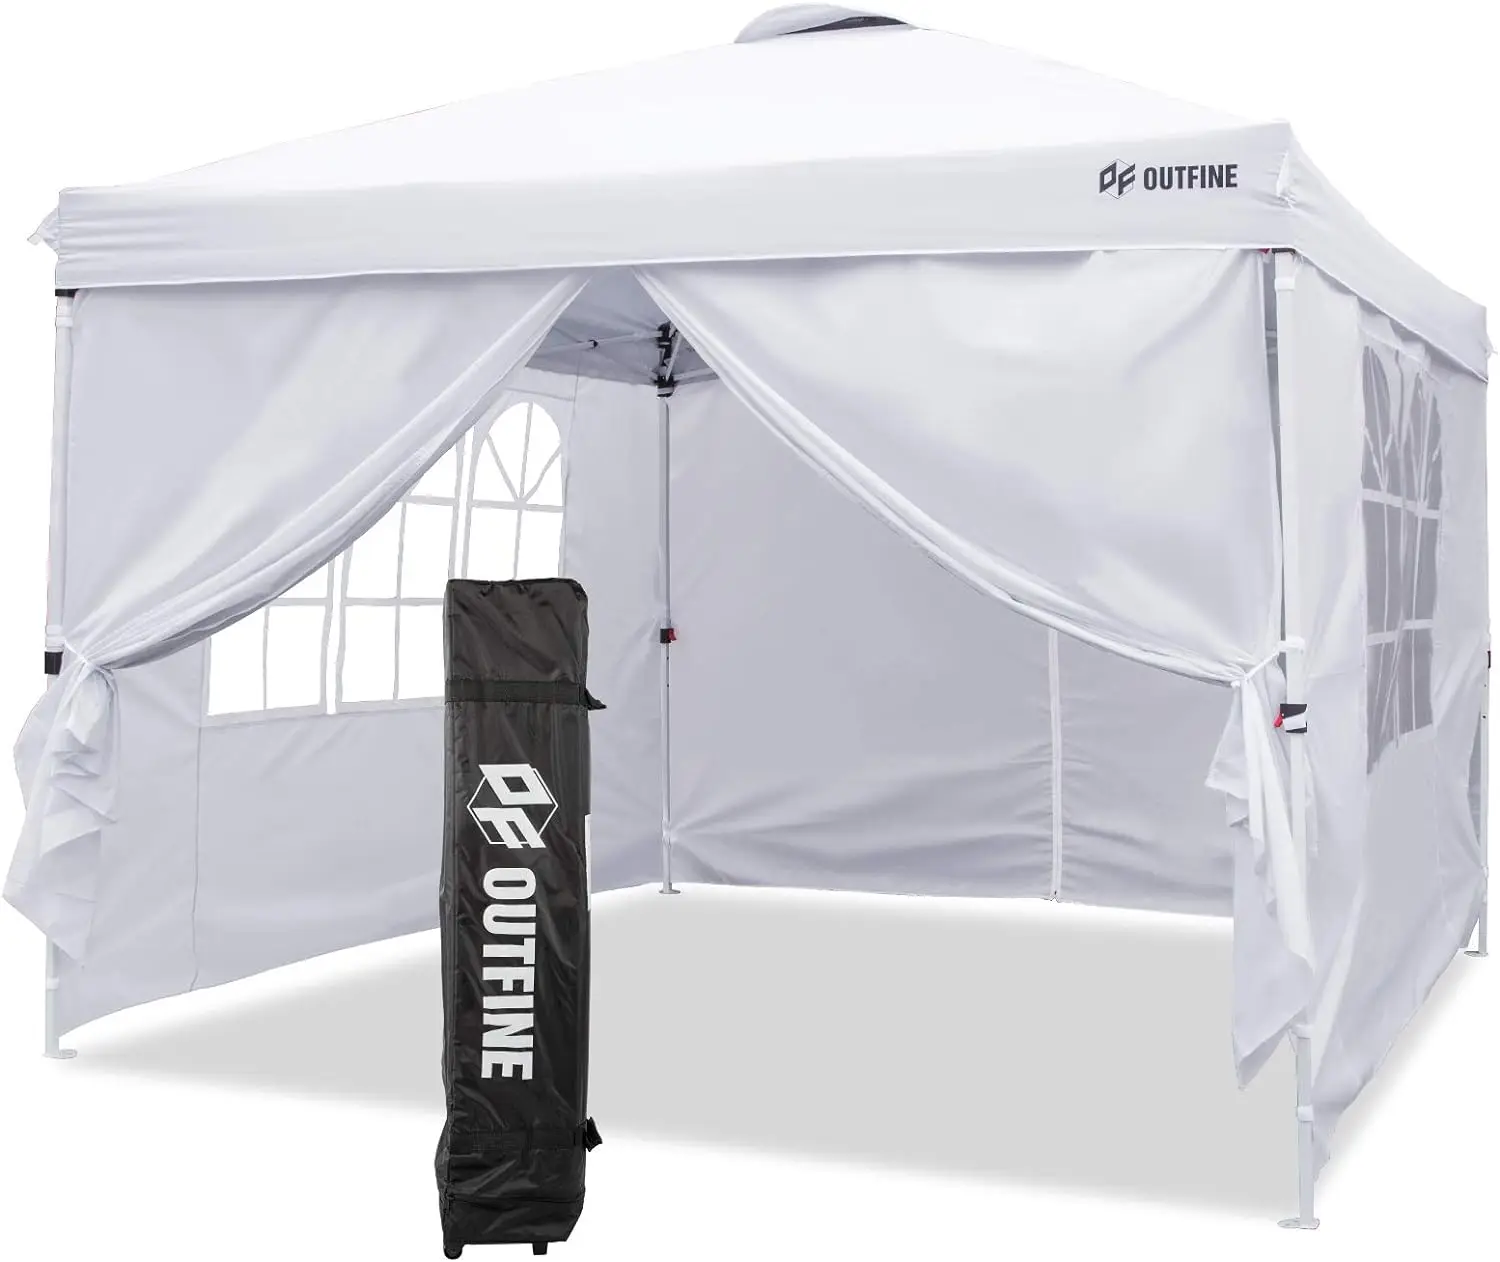 

OUTFINE Canopy 10'x10' Pop Up Commercial Instant Gazebo Tent, Fully Waterproof, Outdoor Party Canopies with 4 Removable Sidewall